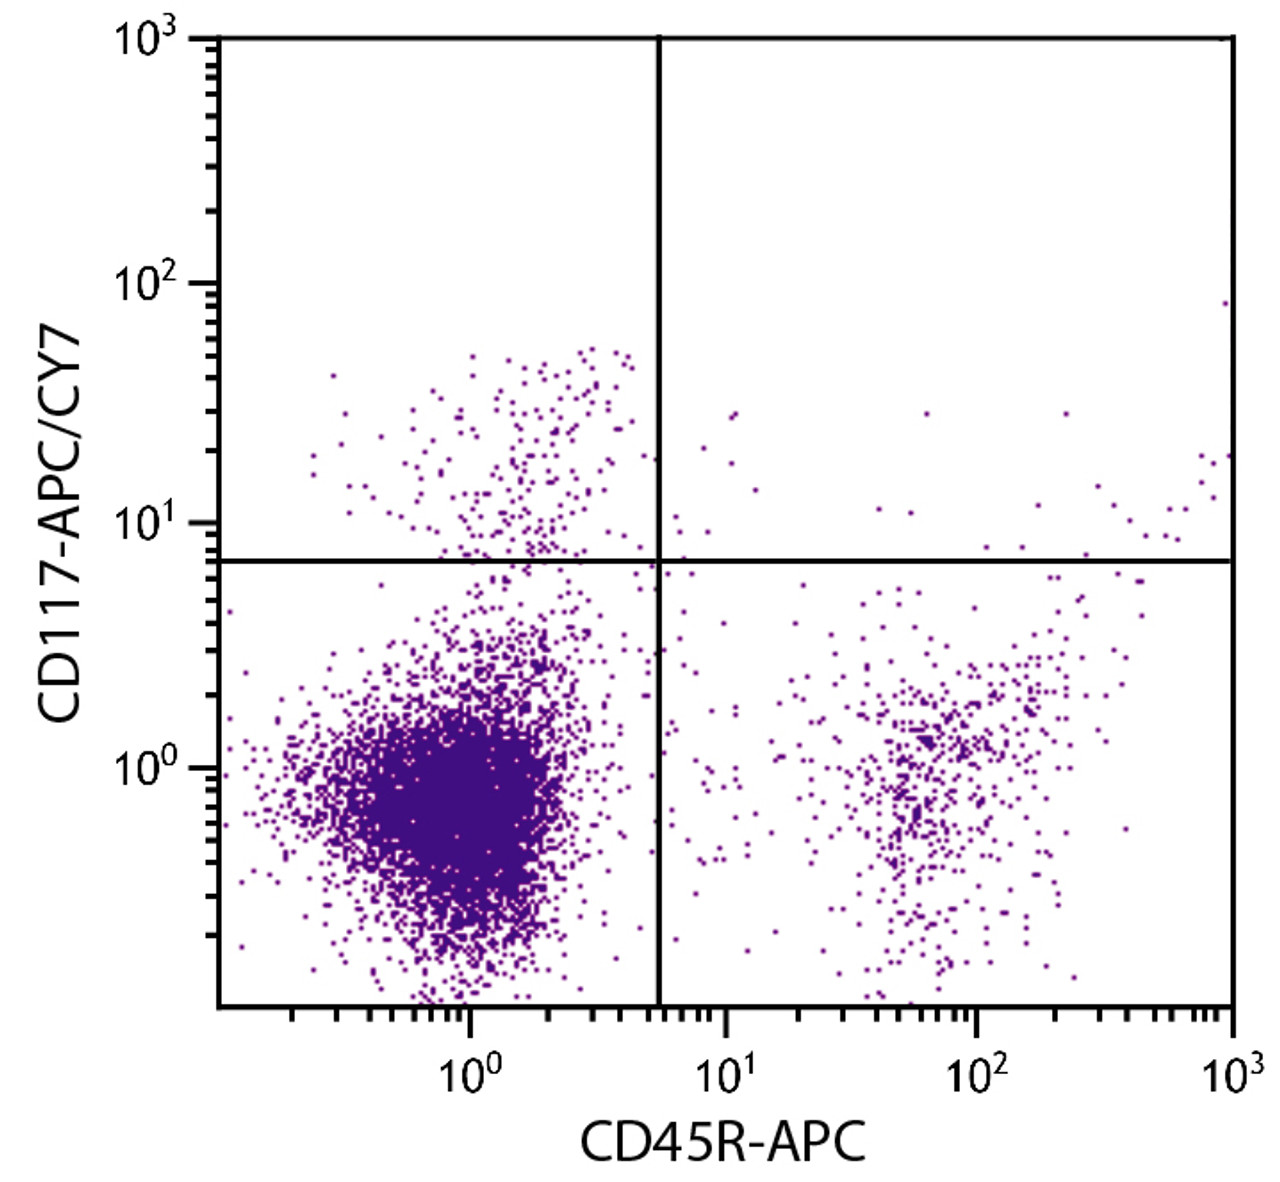 C57BL/6 mouse bone marrow cells were stained with Rat Anti-Mouse CD117-APC/CY7 (Cat. No. 99-022) and Rat Anti-Mouse CD45R-APC .